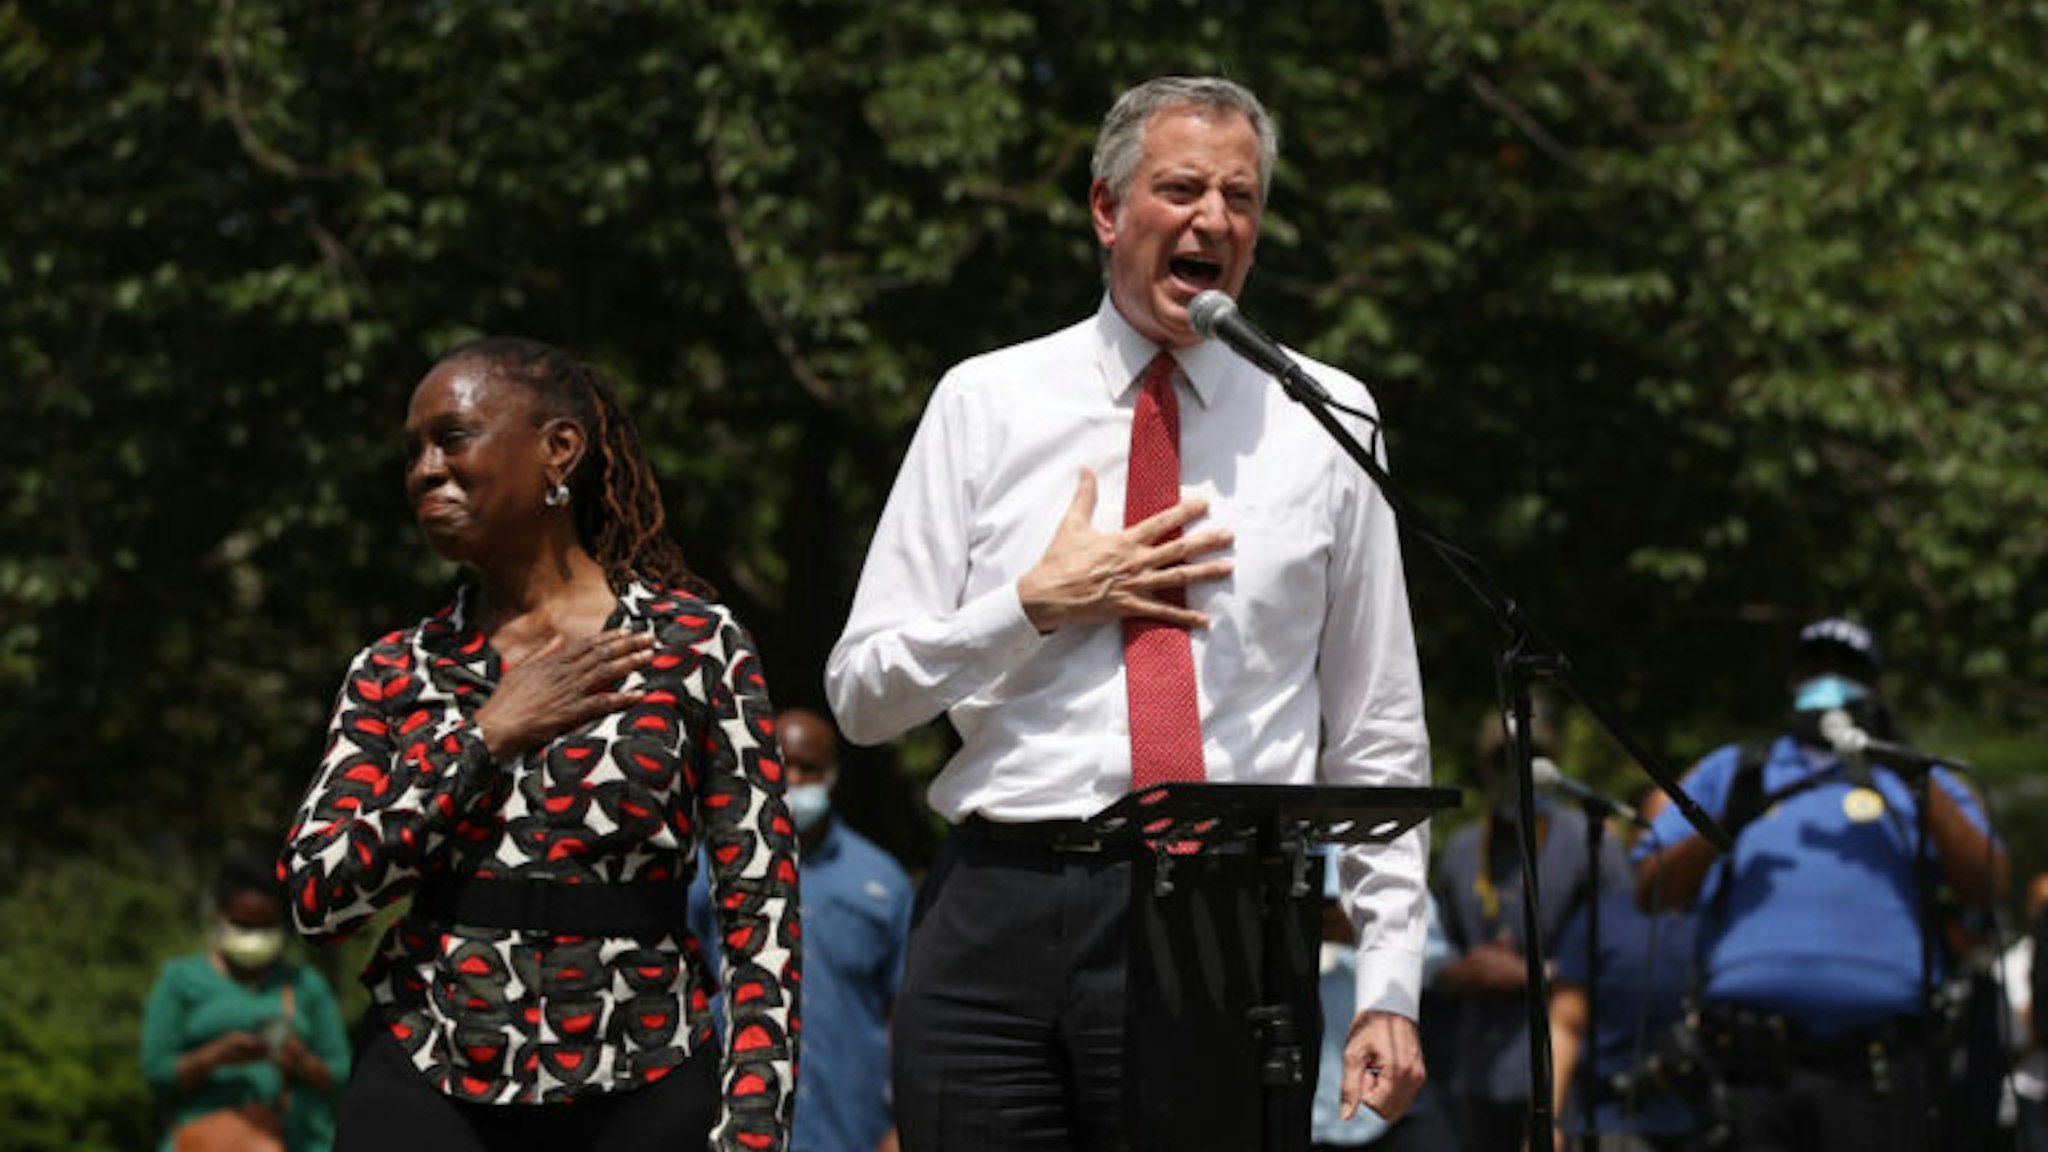 NEW YORK, NEW YORK - JUNE 04: New York Mayor Bill de Blasio speaks to an estimated 10,000 people as they gather in Brooklyn’s Cadman Plaza Park for a memorial service for George Floyd, the man killed by a Minneapolis police officer on June 04, 2020 in New York City. Floyd’s brother, Terrence, local politicians and civic and religious leaders also attended the event before marching over the Brooklyn Bridge. (Photo by Spencer Platt/Getty Images)